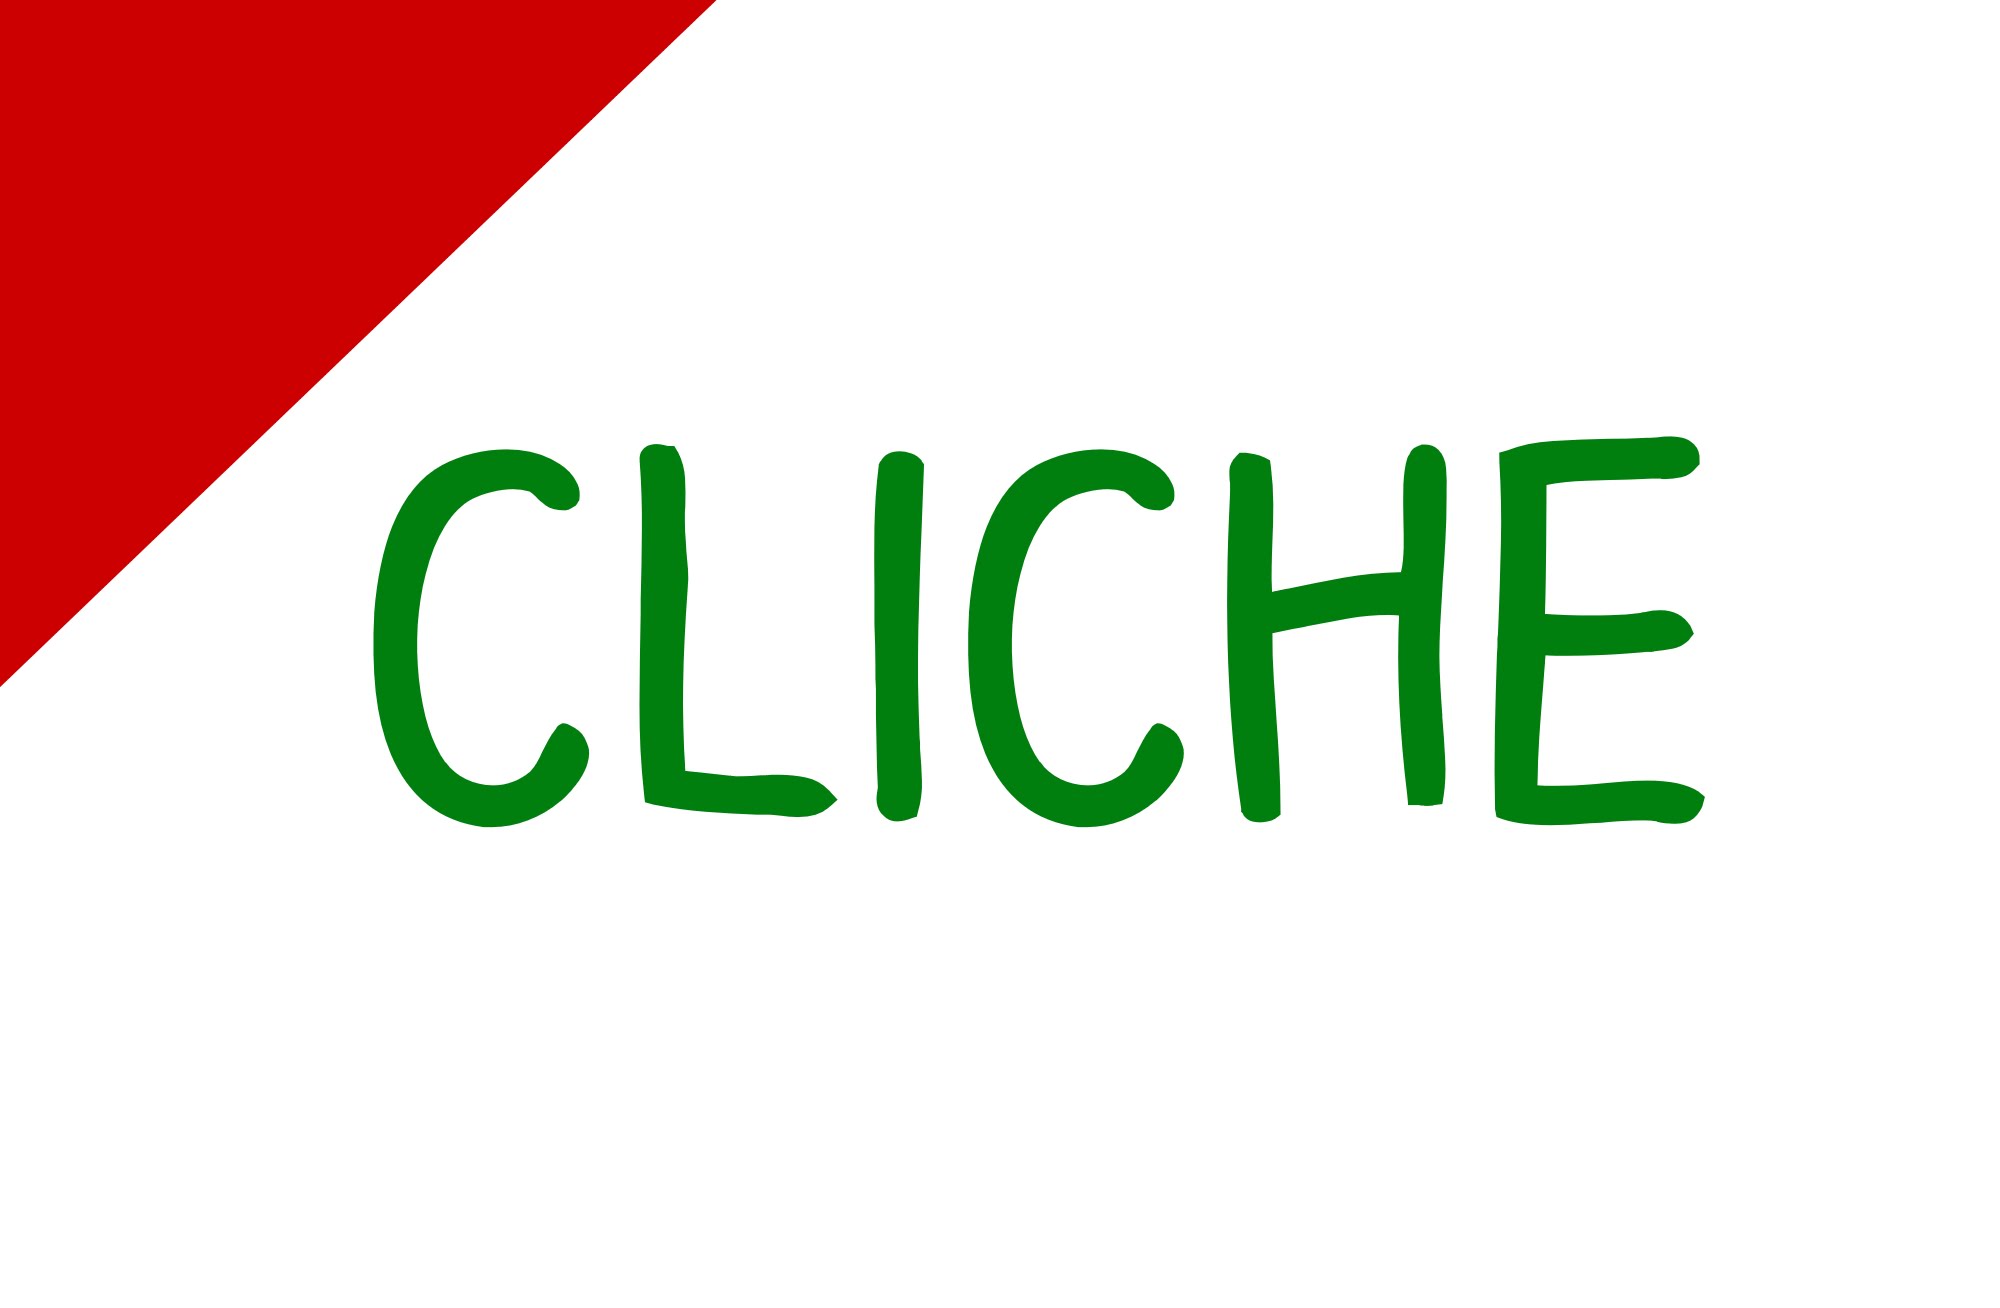 Learn English Words - Cliche (Vocabulary Video) - YouTube